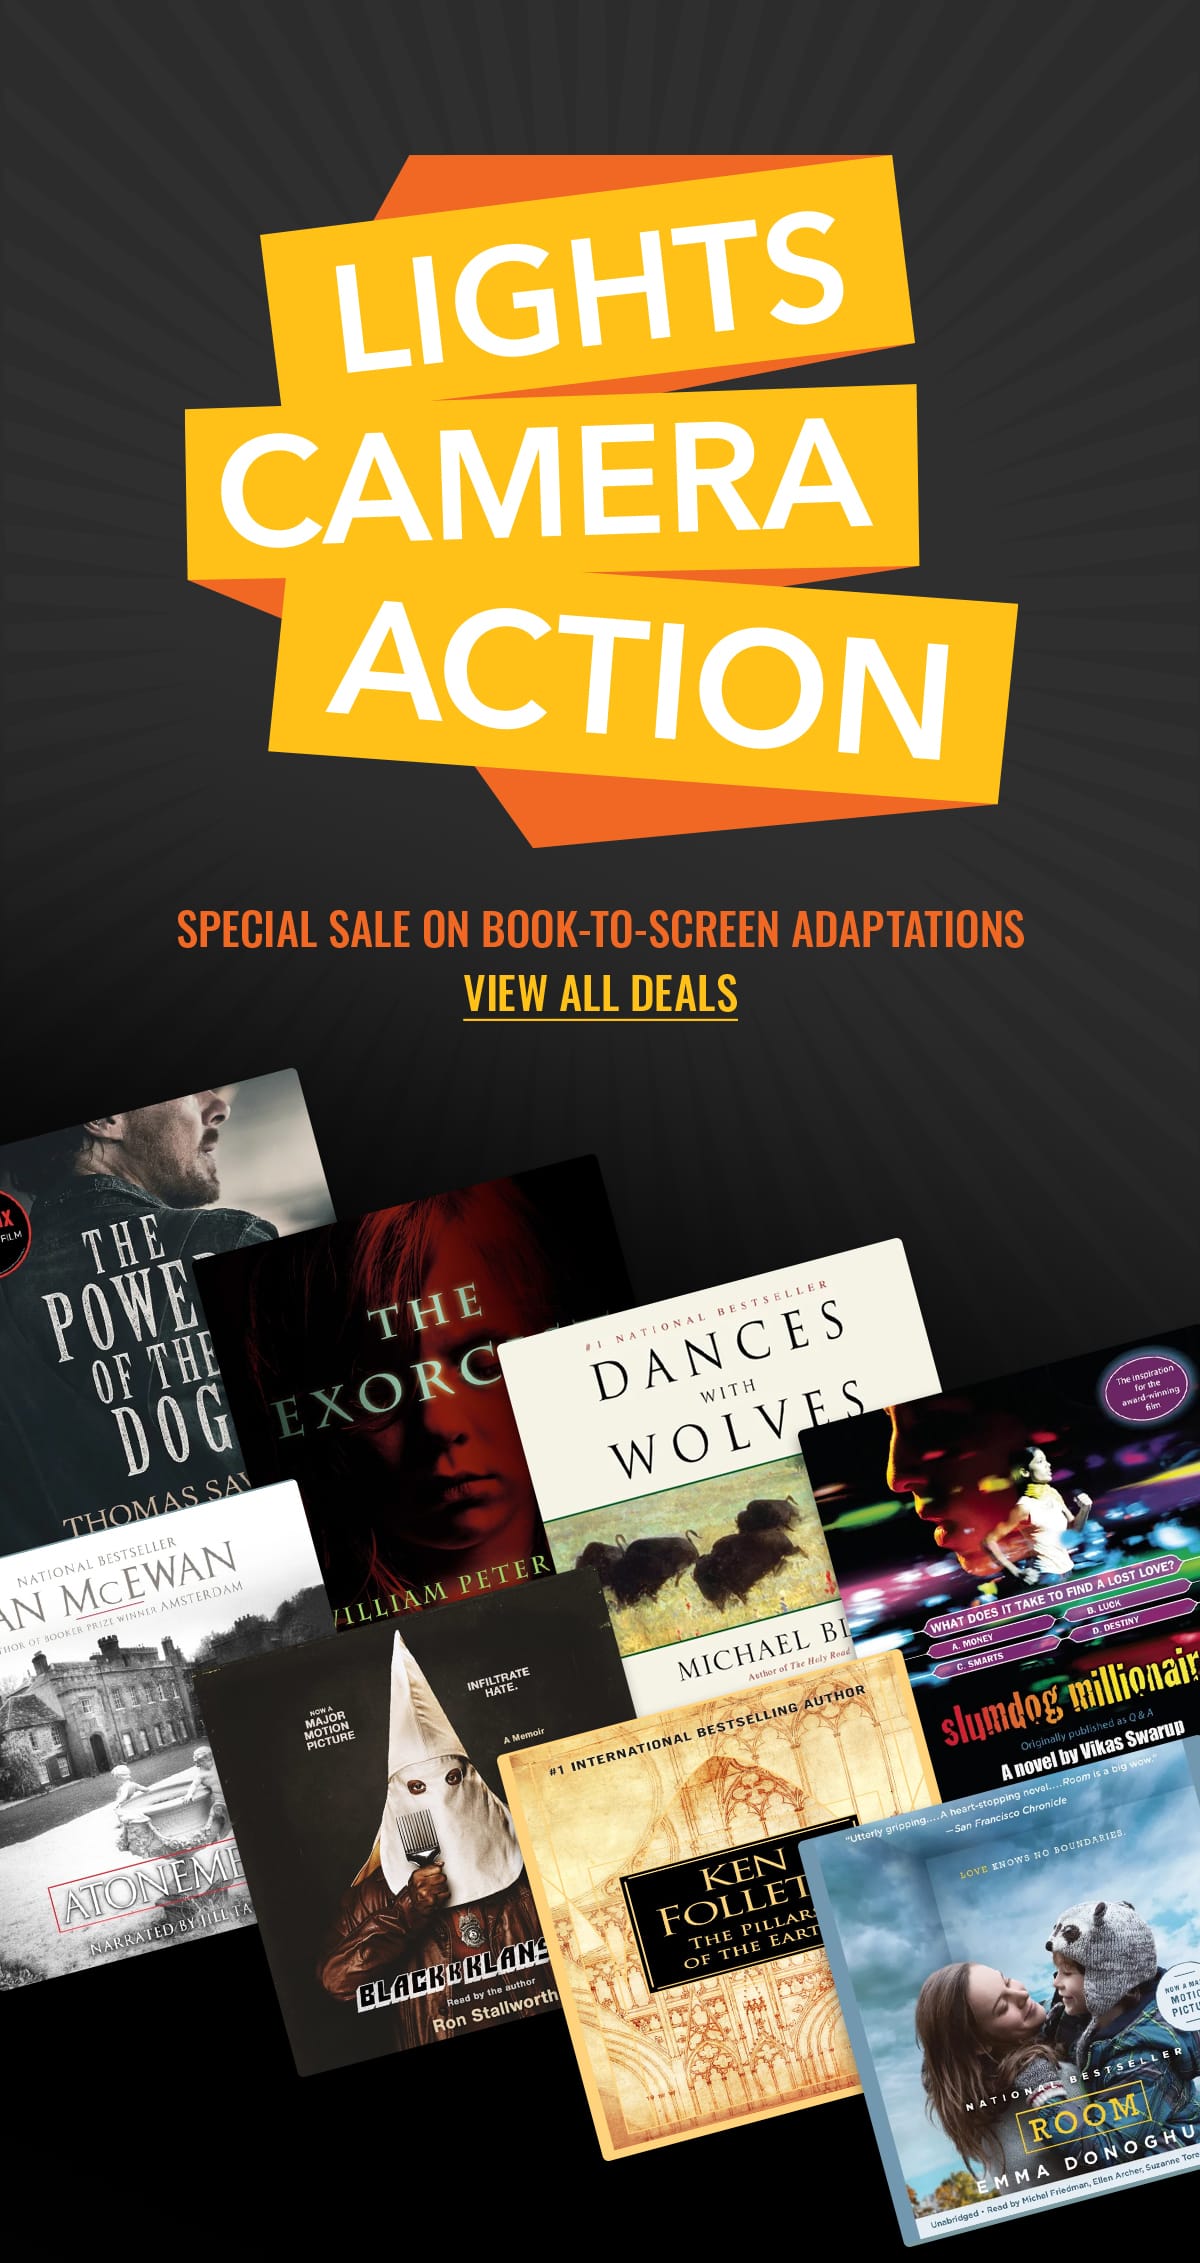 Special Sale on Book-to-Screen Adaptations